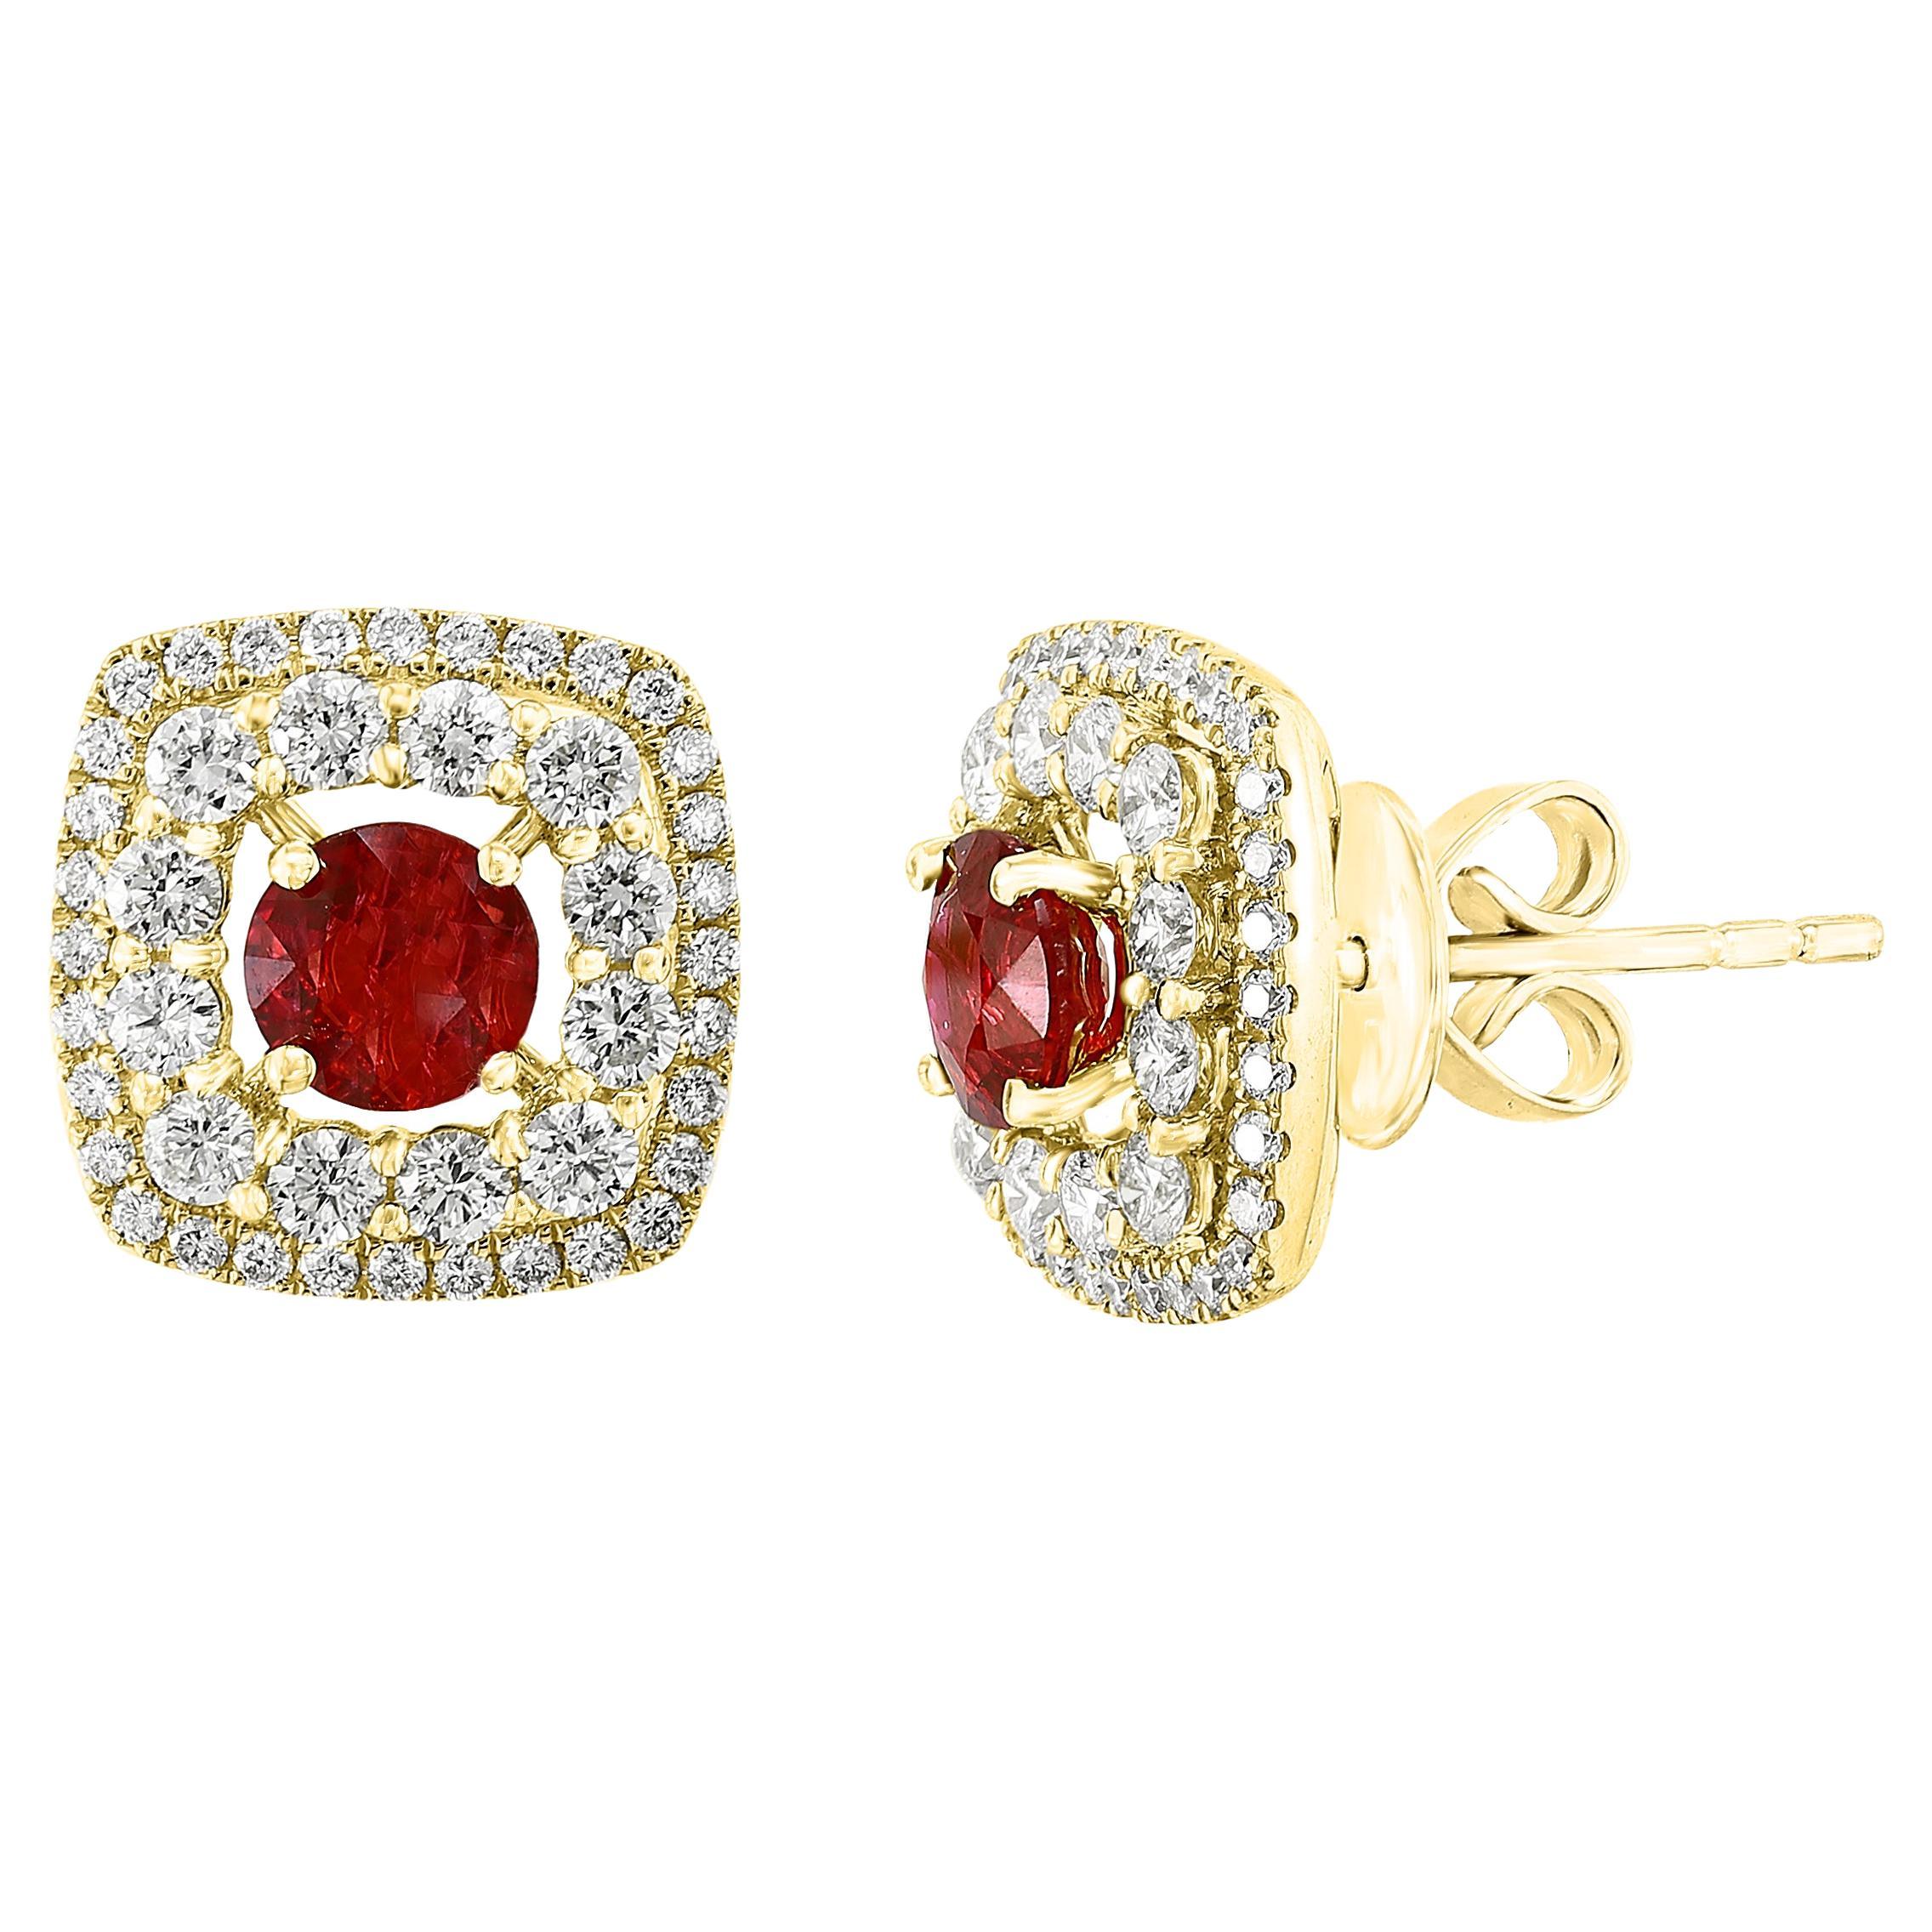 0.73 Carat Round Cut Ruby and Diamond Stud Earrings in 18K Yellow Gold